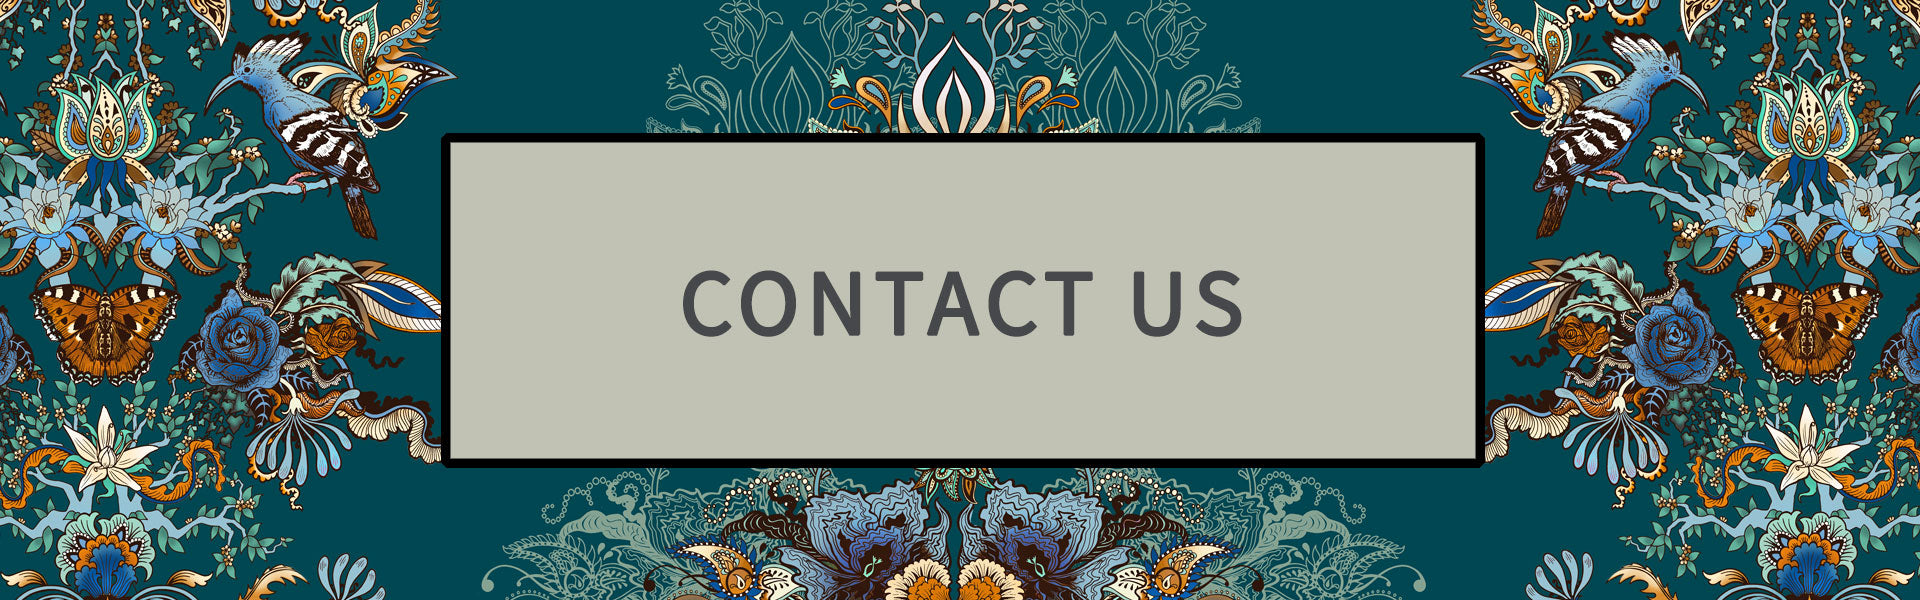 Contact Us at Becca Who, Designer Fabric and Wallpaper